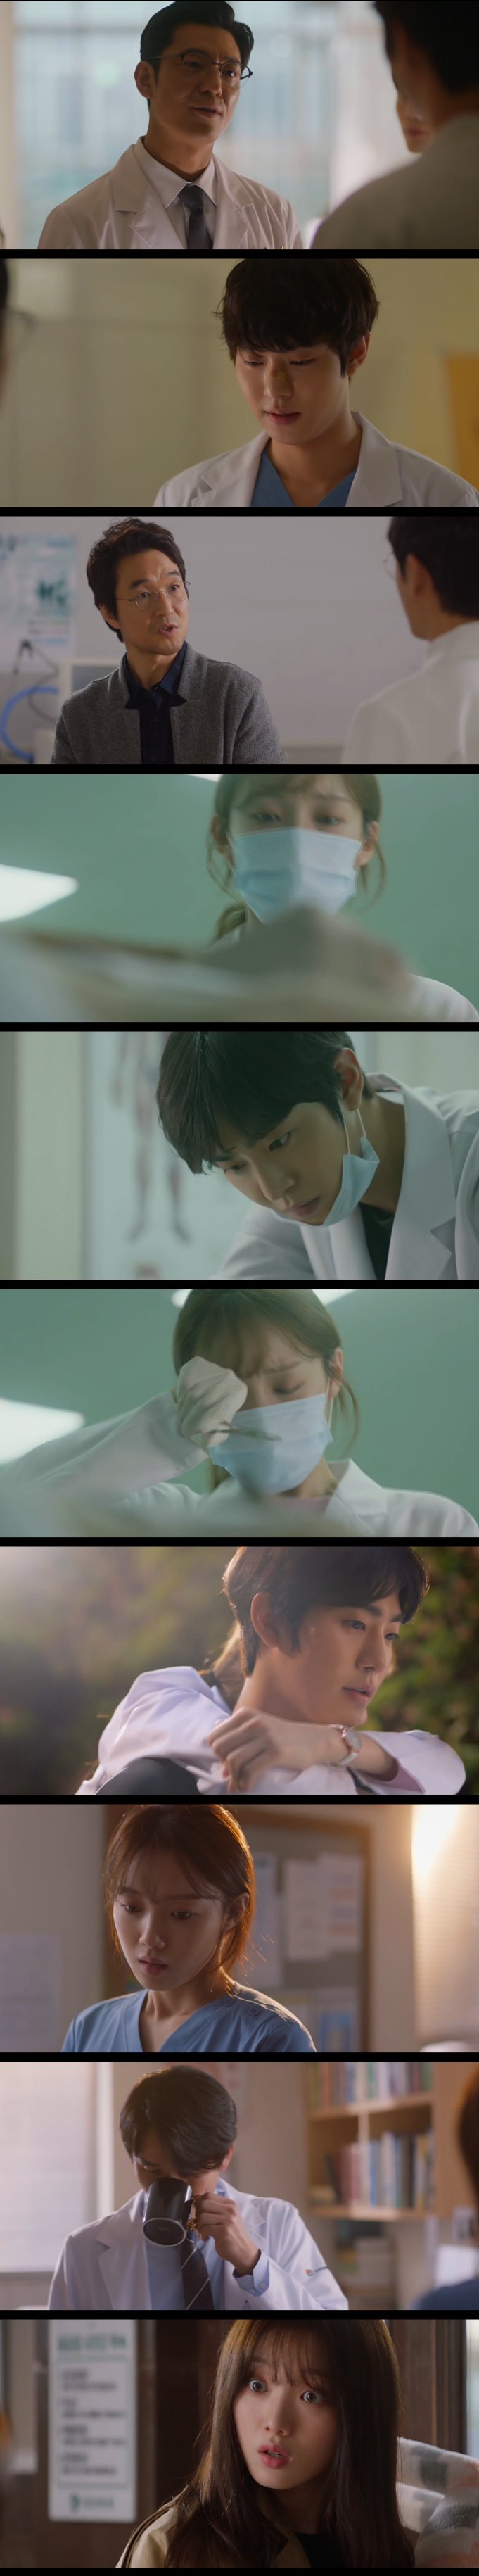 Han Suk-kyu, Lee Sung-kyung and Ahn Hyo-seop of Romantic Doctor Kim Sabu 2 will be together at Doldam Hospital.In SBS New Moonwha Drama Romantic Doctor Kim Sabu 2 (playplay by Kang Eun-kyung, director Yoo In-sik, hereinafter Kim Sabu 2), which was first broadcast on the afternoon of the 6th, it started as a figure of Kim Sabu (Han Suk-kyu) who saves patients while watching the surgery at the seminar.During surgery, a problem occurred in the patients health, and Professor Park Min-guk (Kim Joo-heon), who was in the house, was in a difficult situation.Kim Sabu, who watched this in the video, talked to the fellow Cha Eun-jae (Lee Sung-kyung), who was sitting in front of him, and borrowed paper and pen to do Memoir of War.He asked Cha to tell the memoir of War, who was his own, to the operating room, Do you run well?Cha Eun-jae asked, Can I ask who you are? Kim Sabu took off his hat and said, Dr. Kim Sabu, who works at Doldam Hospital.The Memoir of War, which Cha Eun-jae delivered, said that the patient was Tension Newmo (Tension Pneumothorax); Park Min-guk, who saw it, completed the demonstration safely, and the patient found a normal pace.After the surgery, Park Min-guk found out that the person who delivered the Memoir of War was Kim Sabu and visited him.Cha asked Kim Sabu, How did you know? And Kim Sabu did not do his job and found himself. Cha Eun-jae was embarrassed by Kim Sabus words.Kim Sabu was highly skilled in the operation of Seo Woo Jin. Kim Sabu approached Seo Woo Jin first and said, Do you need a job?I approached him and Seo Woo Jin said,Who are you? Kim said. I dont know if youve heard of Doldam Hospital. I just need GS there.Seo Woo Jin wondered, Do you know me? And Kim said, I was cut off today.I am only about to say that I am bullied because of the accusations.Seo Woo Jin said, But you will give me a job? Why? And Kim said, Why?GS is needed, but the surgery is pushed back, and when I do this, I throw a place to pretend to be good, and I want to leave all kinds of bad surgery.Cha Eun-jae joined GS for a while, but fell down due to symptoms such as overco-work during surgery.Professor Cha Eun-jae, who learned that he had a phobia of surgery and was eating a tranquilizer accordingly, instructed him to go to the hospital.=